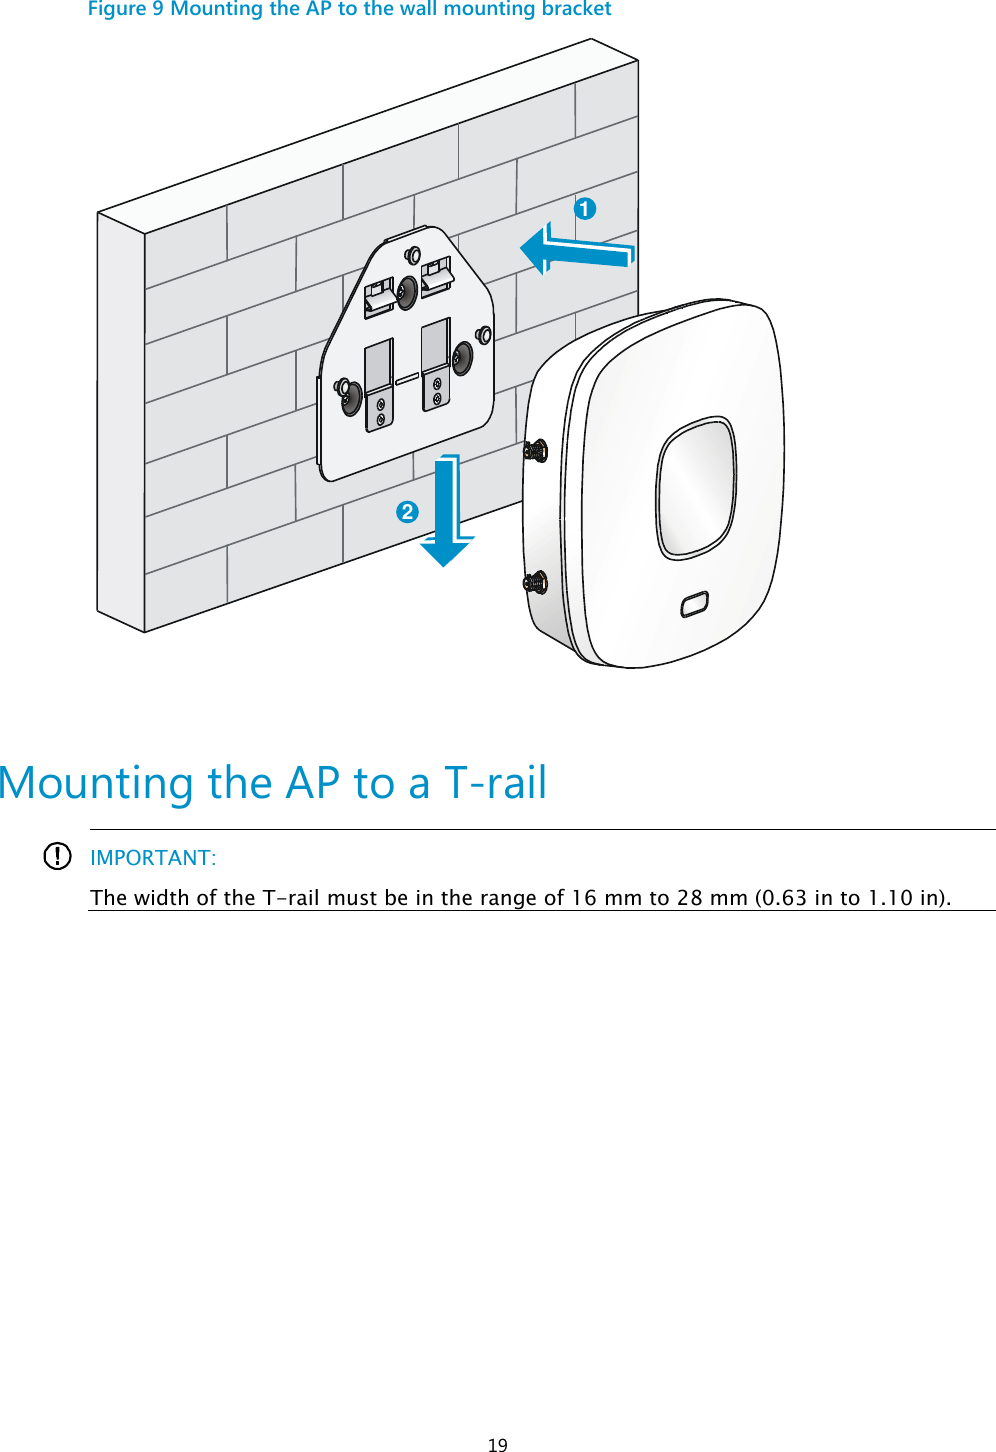  19 Figure 9 Mounting the AP to the wall mounting bracket   Mounting the AP to a T-rail   IMPORTANT: The width of the T-rail must be in the range of 16 mm to 28 mm (0.63 in to 1.10 in).  12